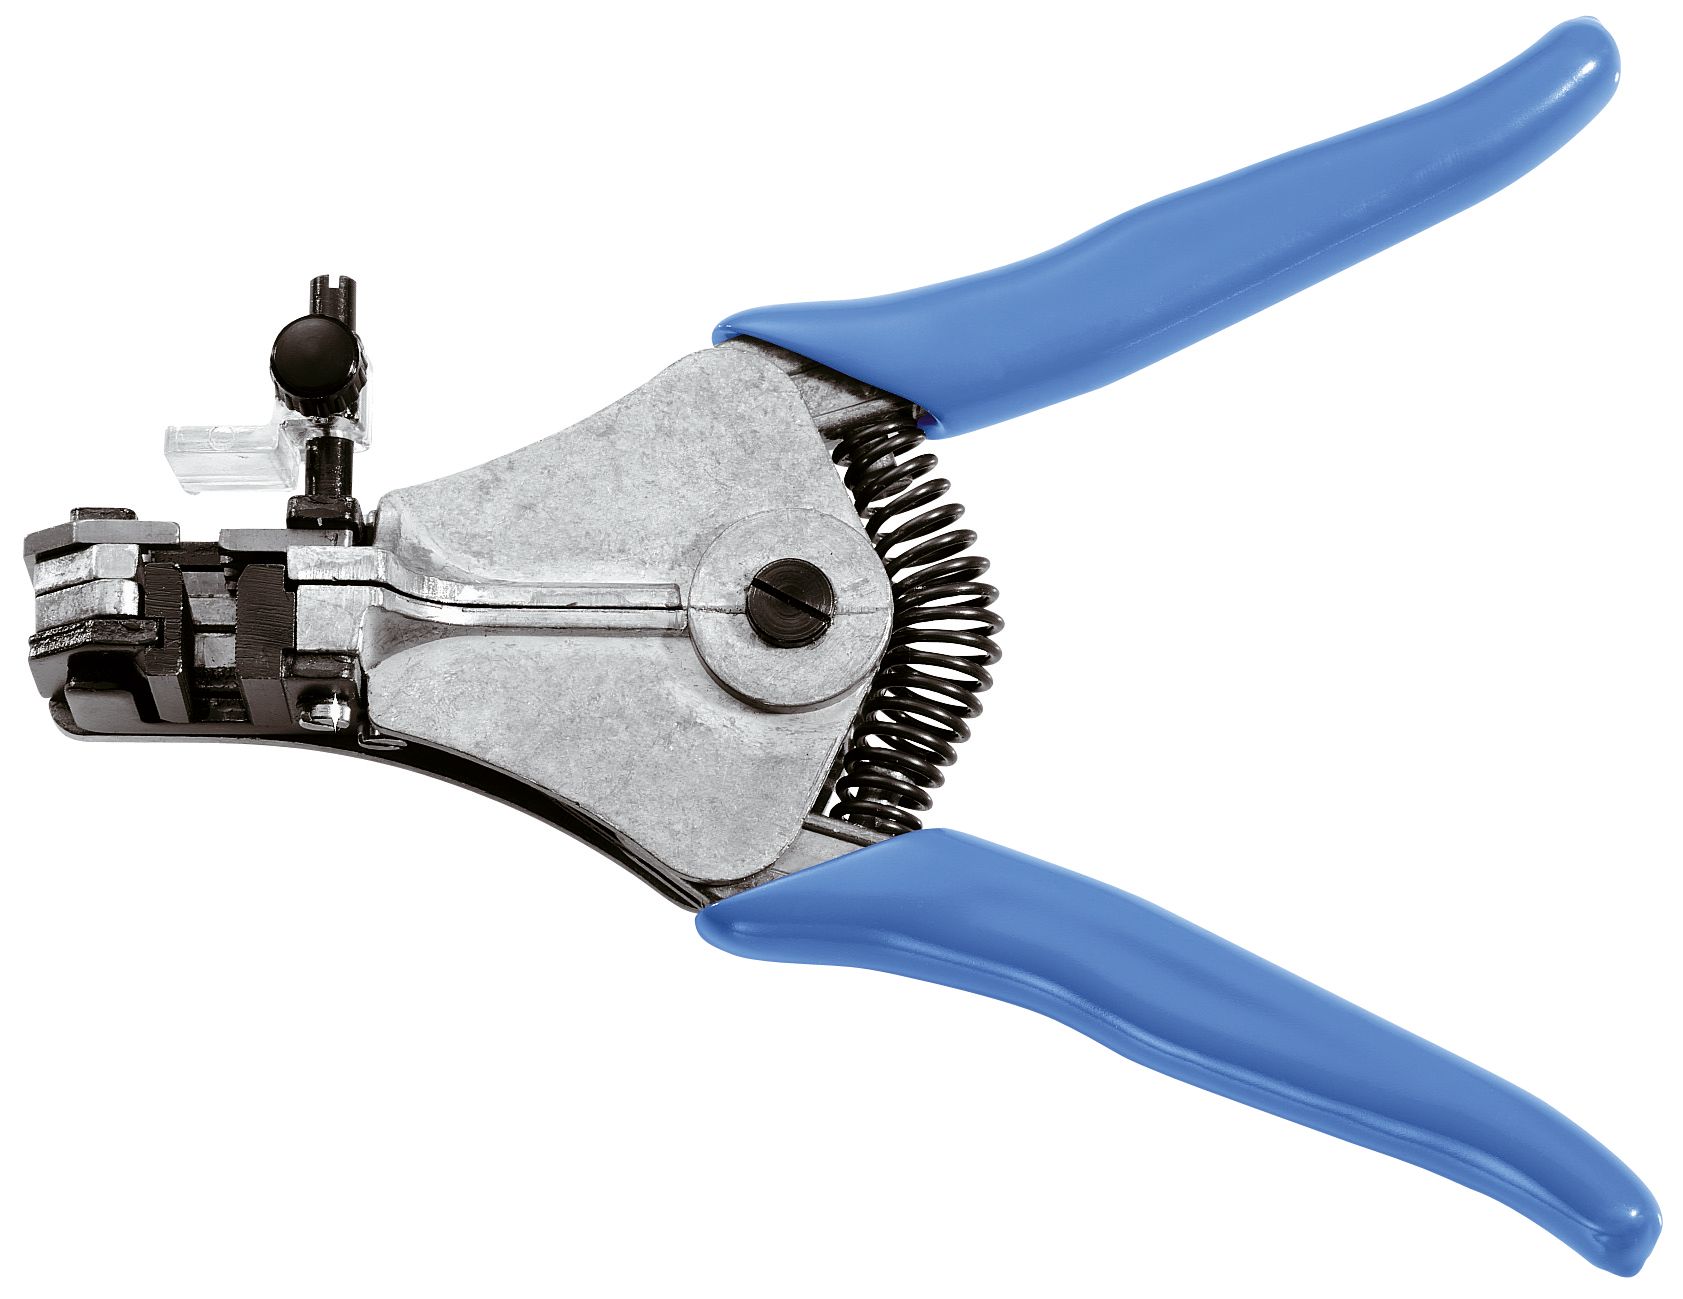 EXPERT by FACOM® Cable cutter, 42 mm